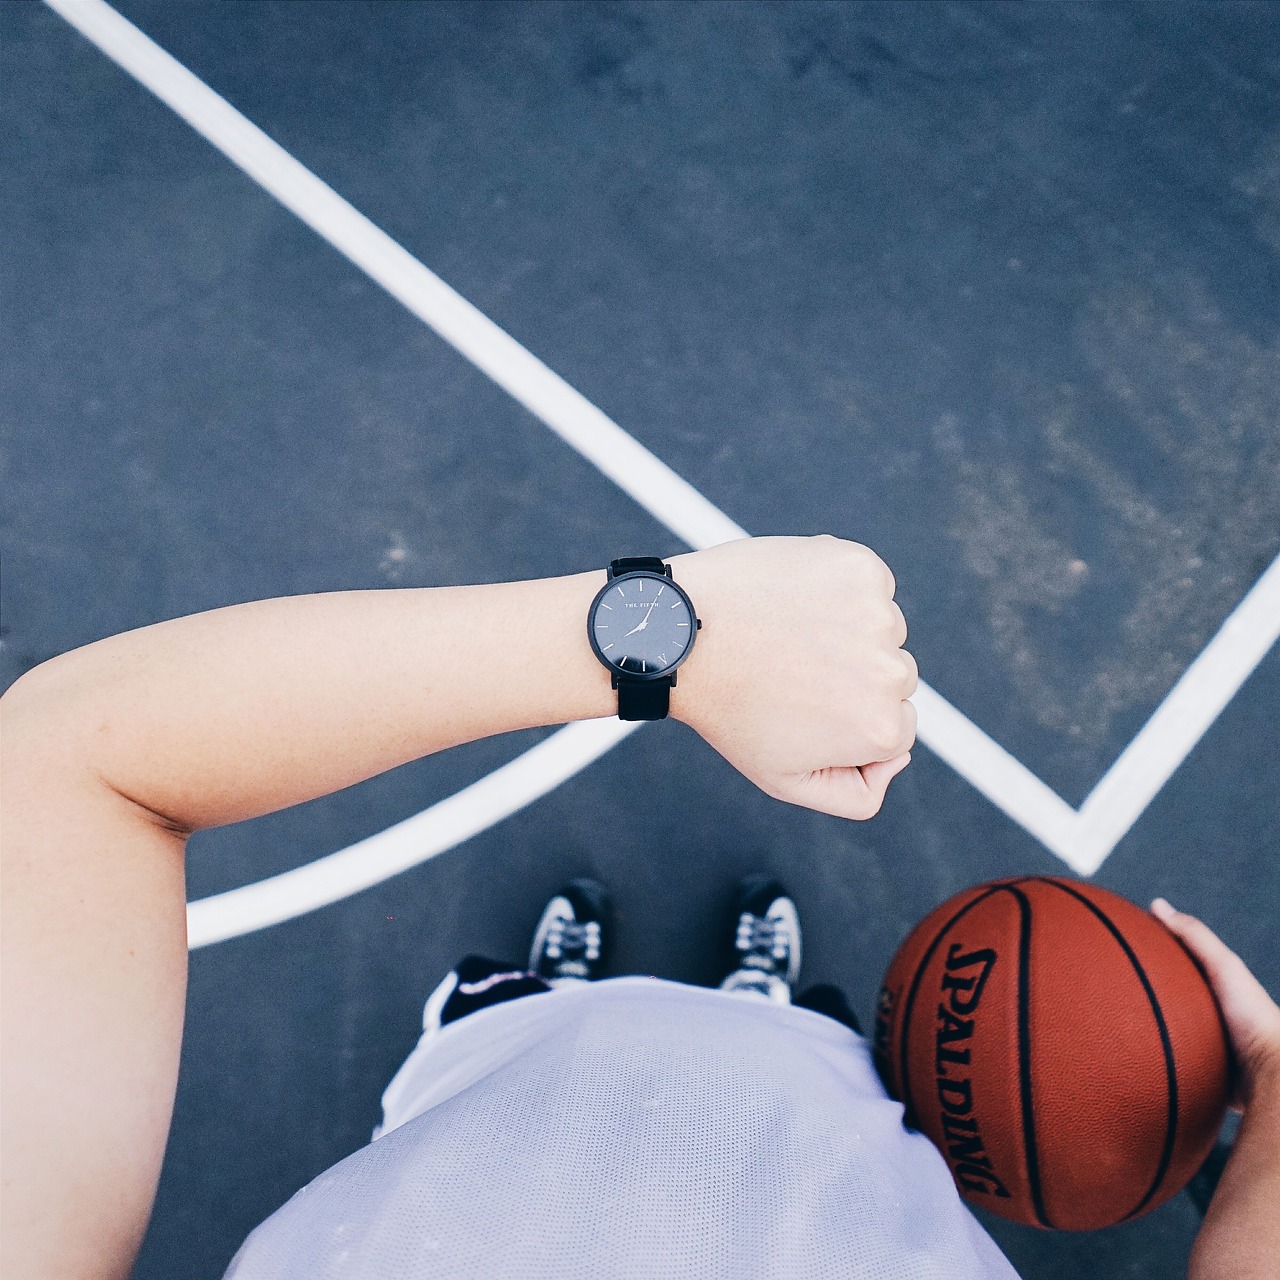 Sports watch – which one to buy?